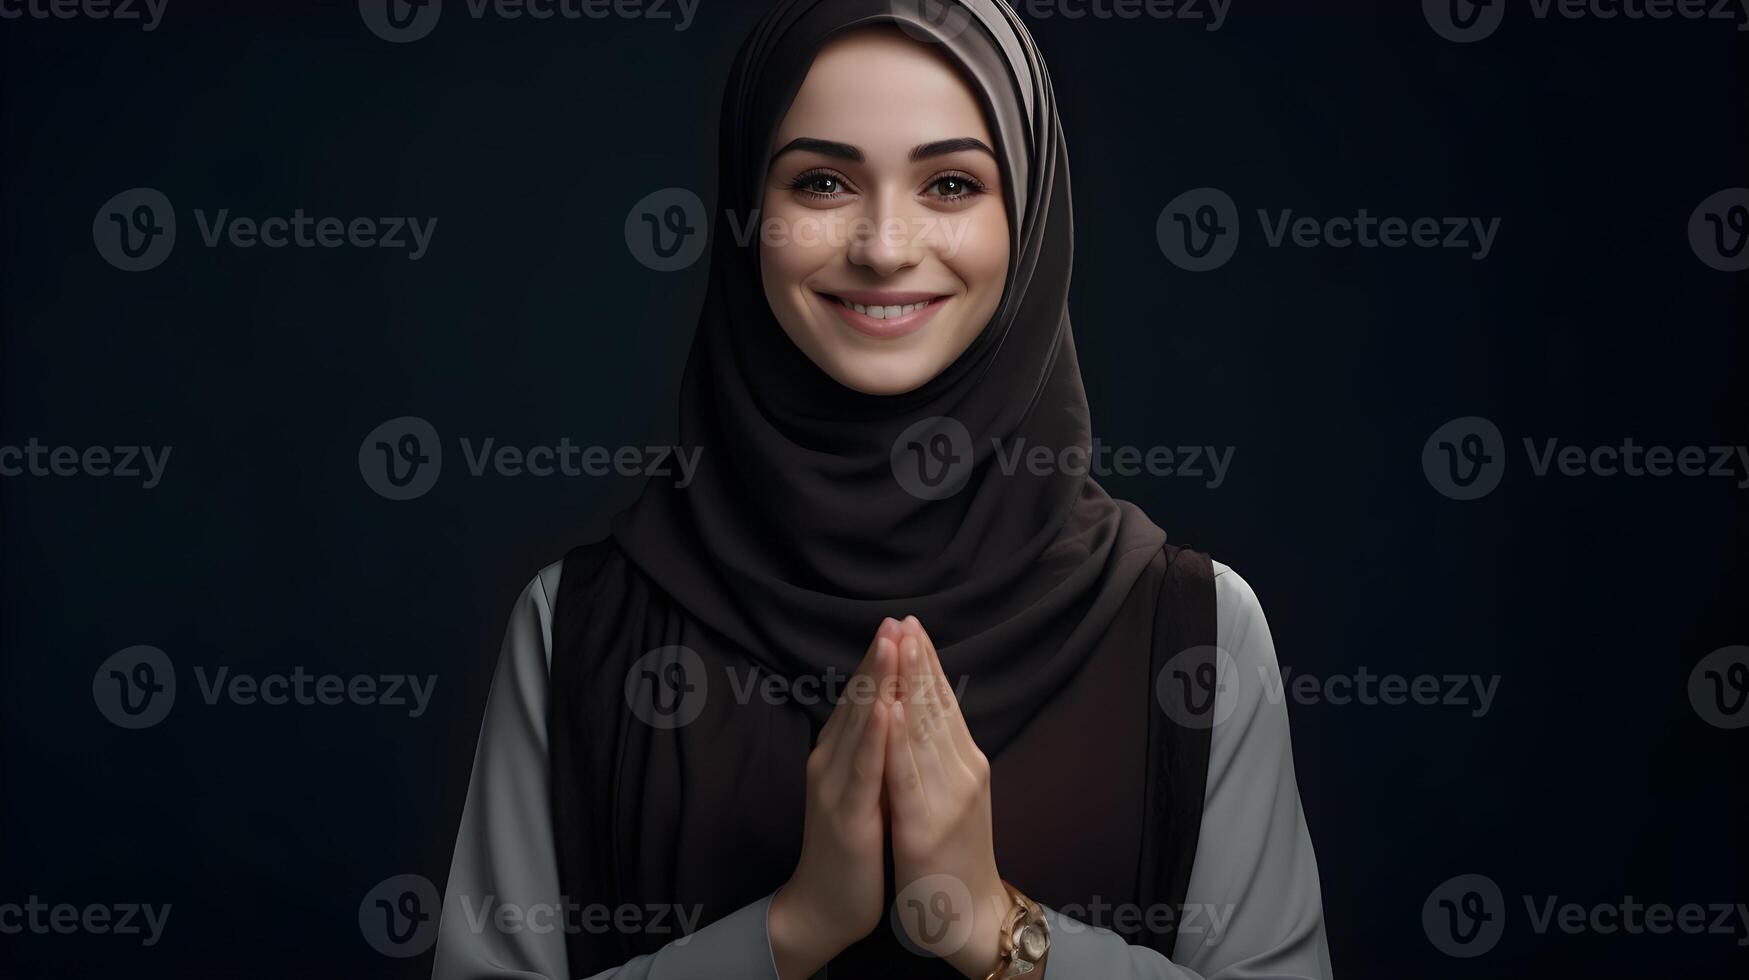 European woman wearing scarf is praying and smiling on black background photo